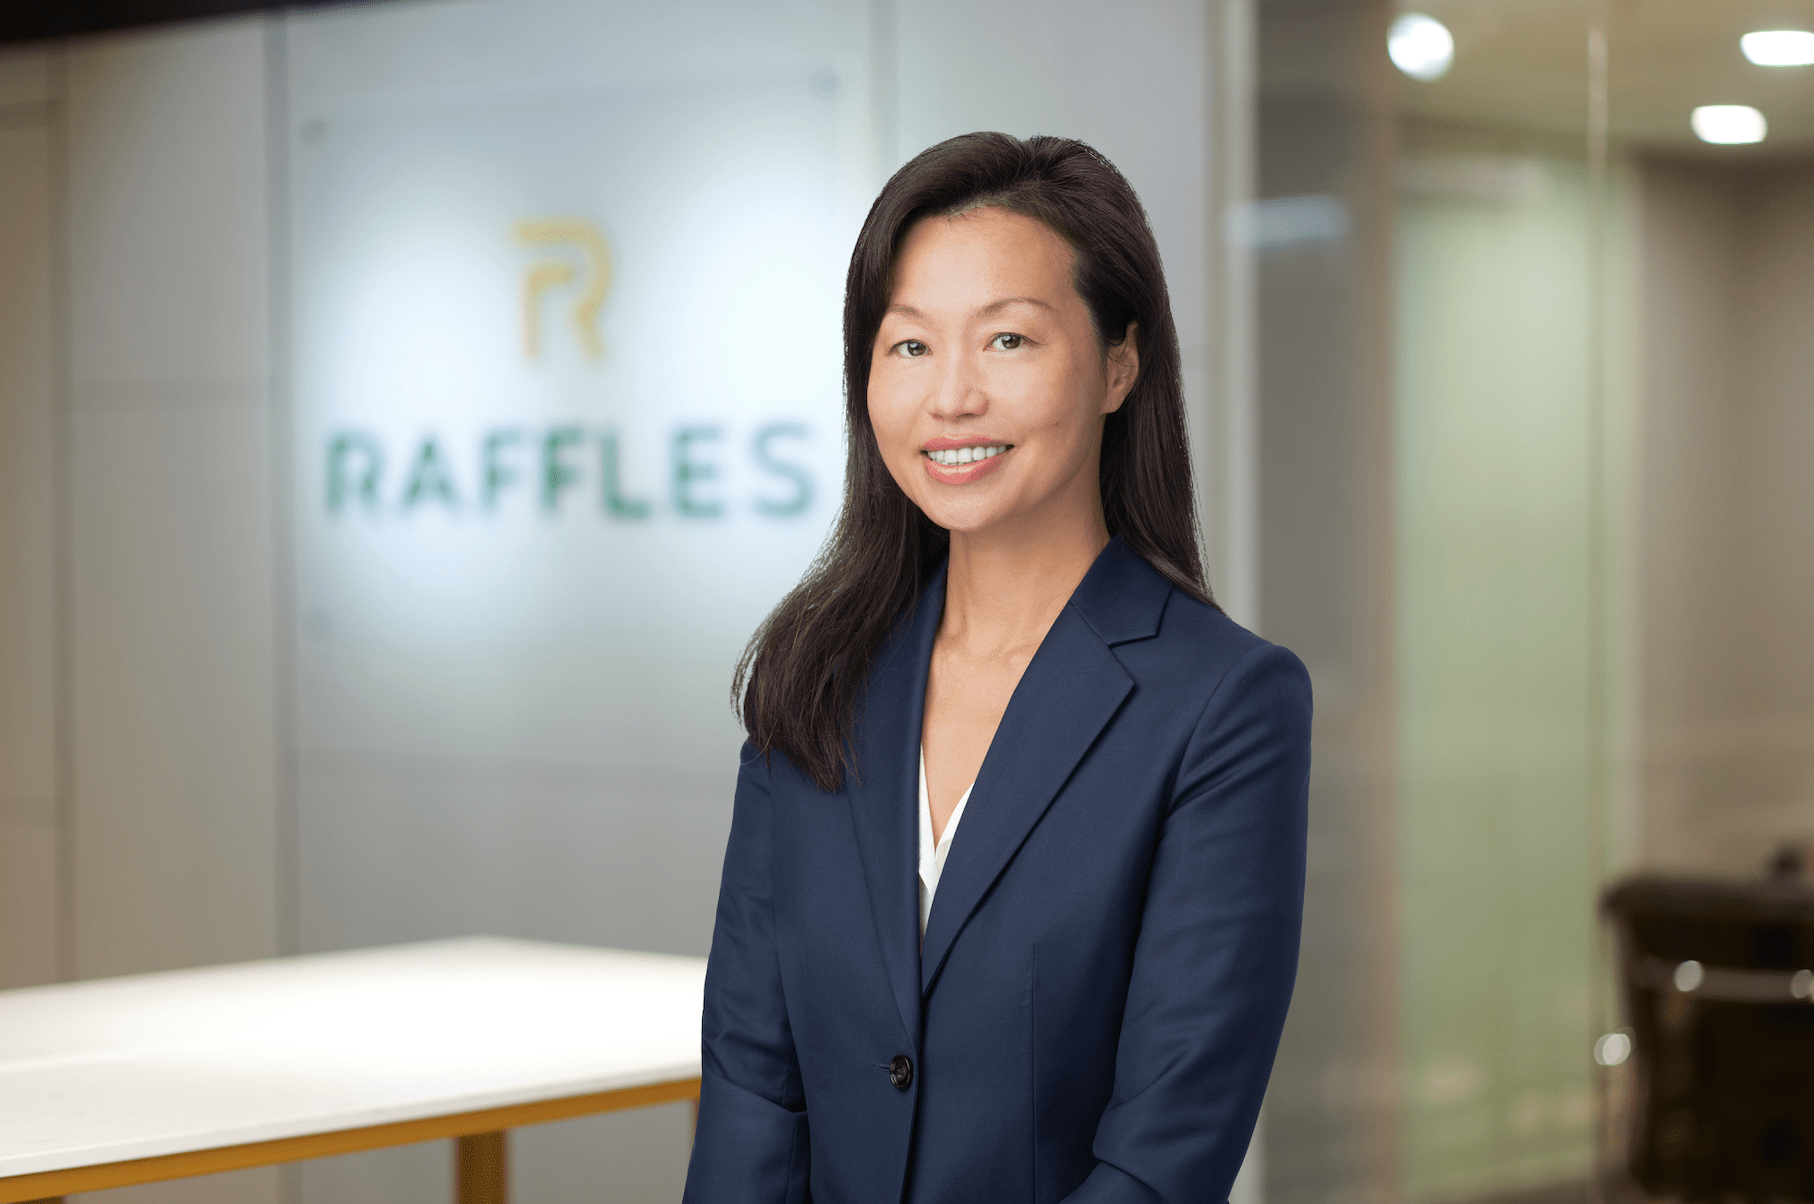 The LP View: Raffles Family Office sees rising opportunities in SE Asia